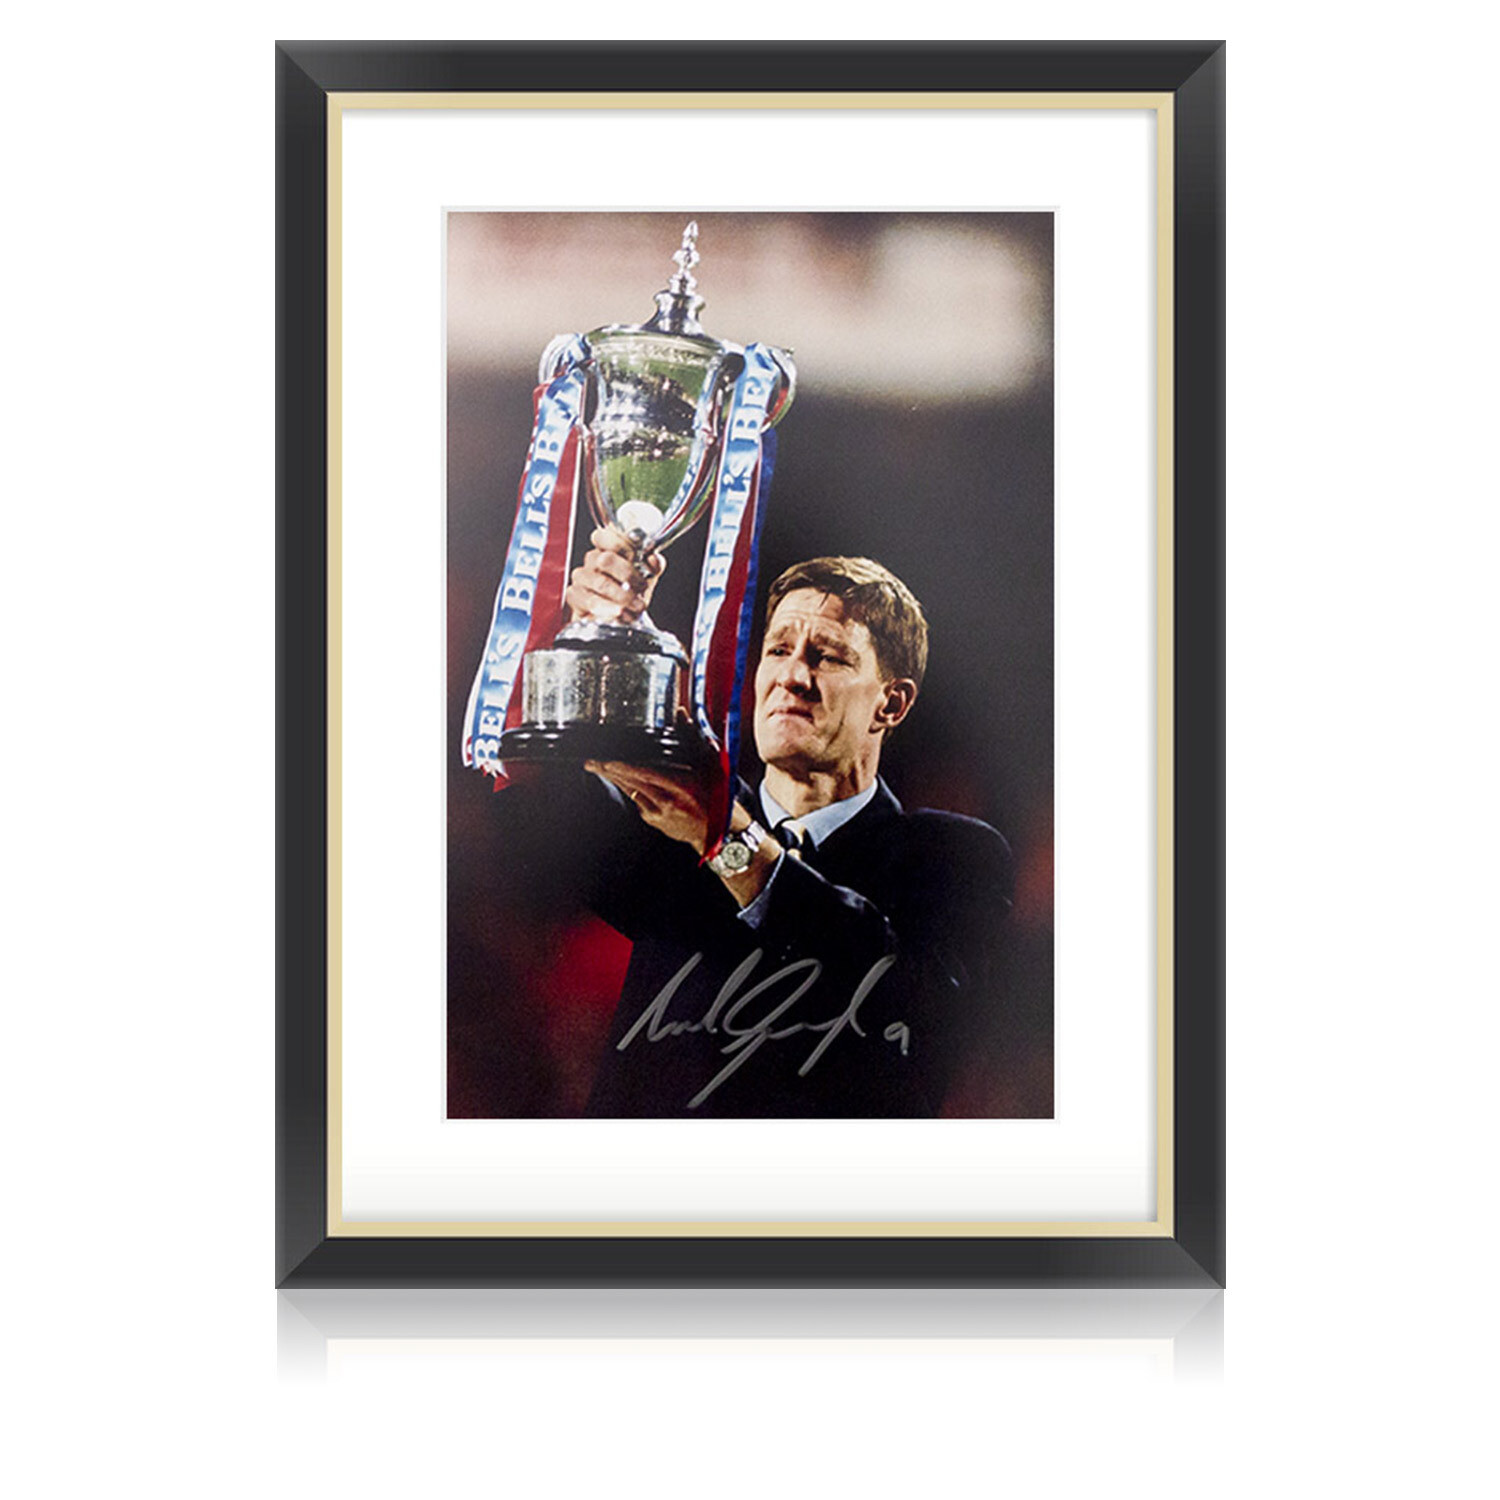 Richard Gough 9 in a Row Signed Print